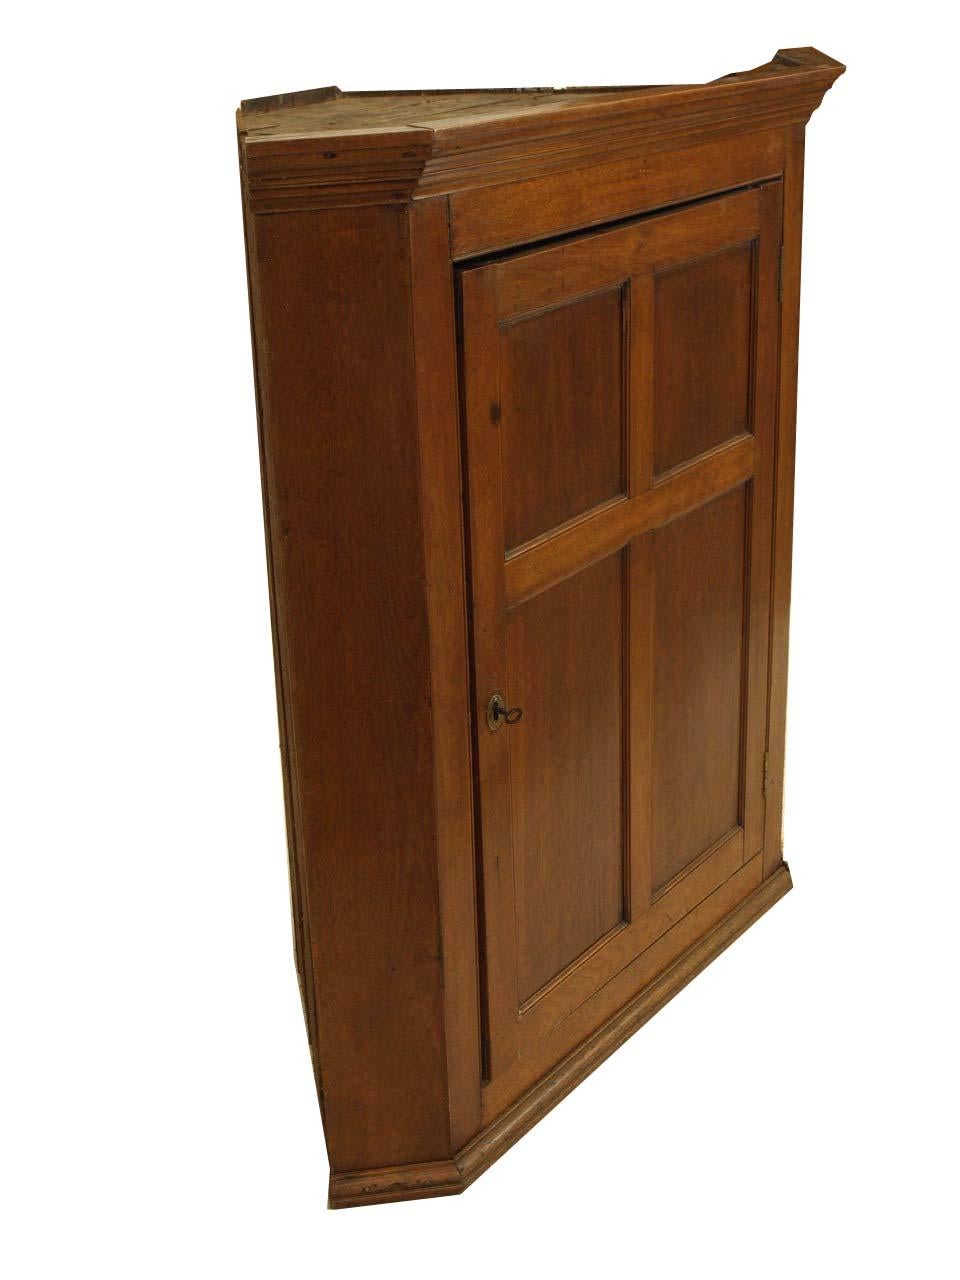 English mahogany one door hanging corner cupboard with cove cornice, the single door with four panels, interior with 2 shelves, working lock and key. Depth and width measurements are taken from the cornice, the depth from the side to the back corner